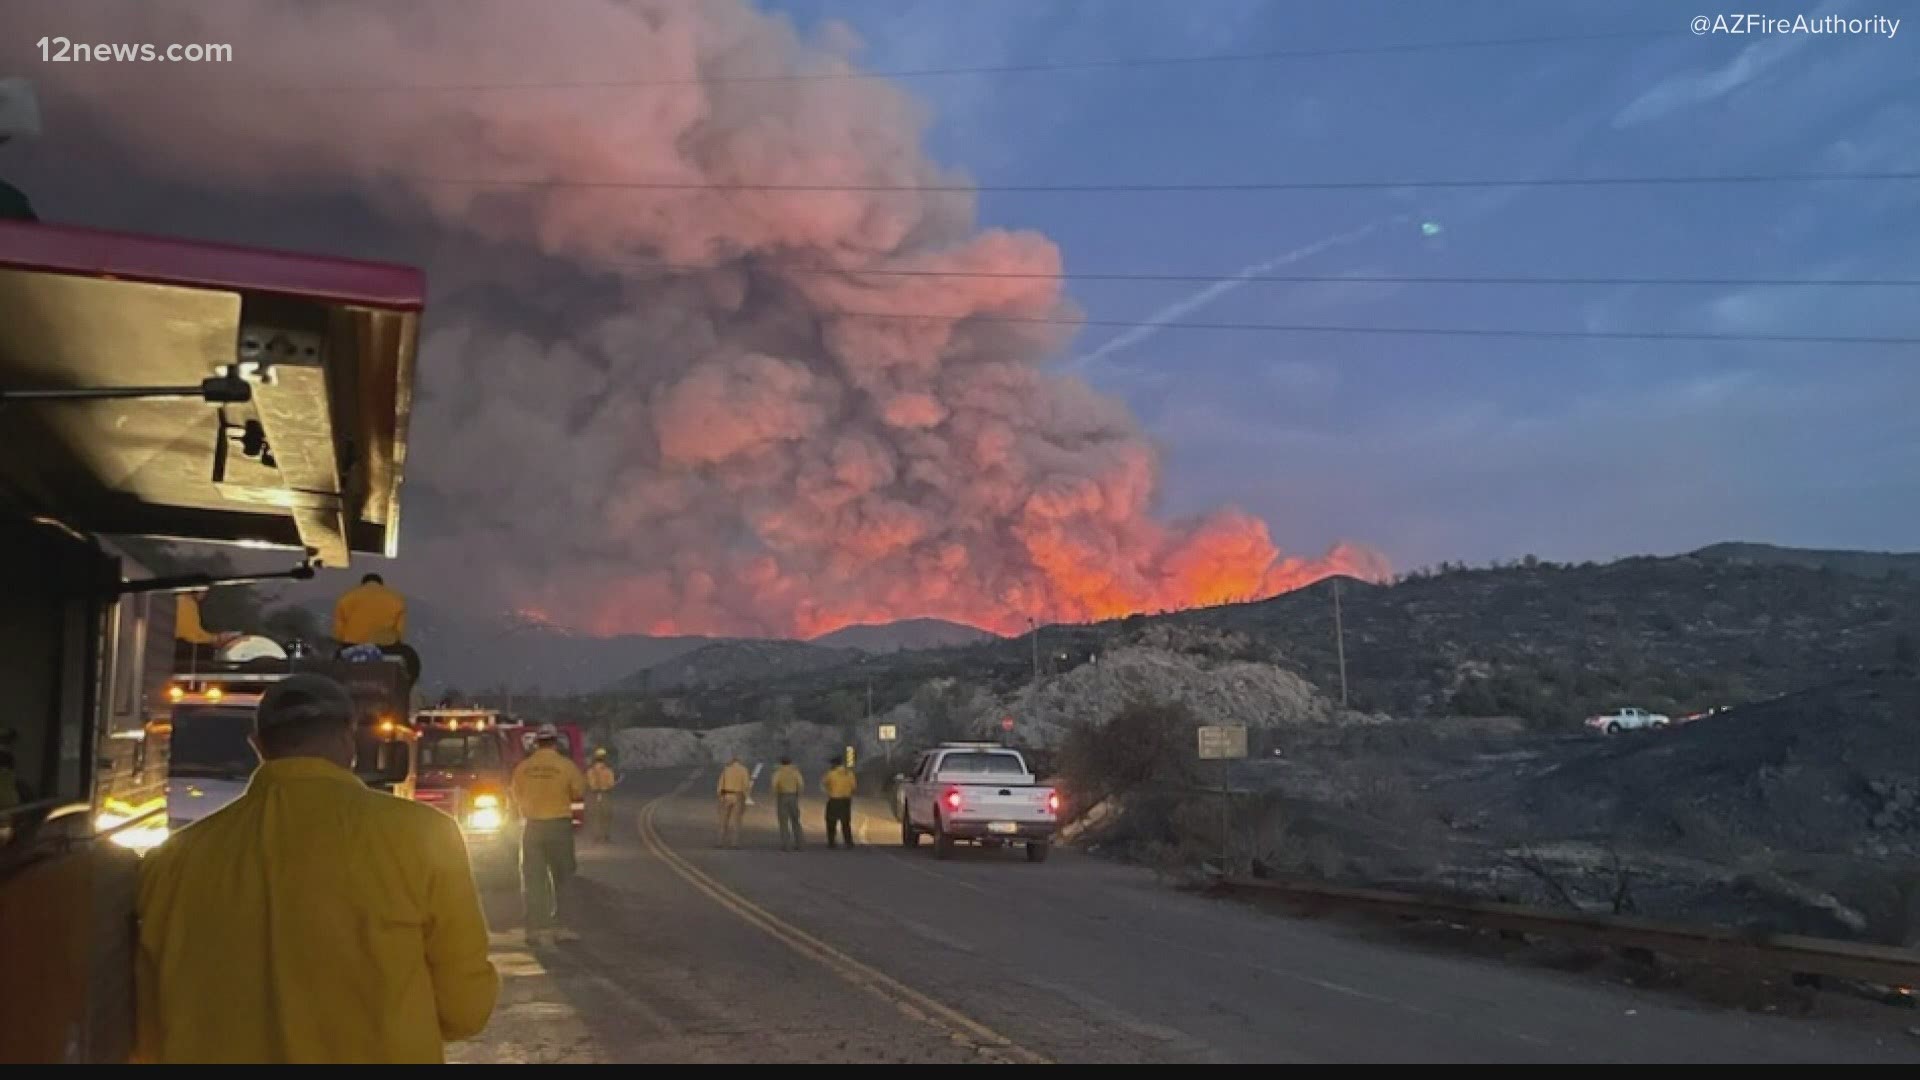 The 2021 wildfire season in Arizona is already proving to be destructive. Niala Charles has more on the wildfires burning across the state.